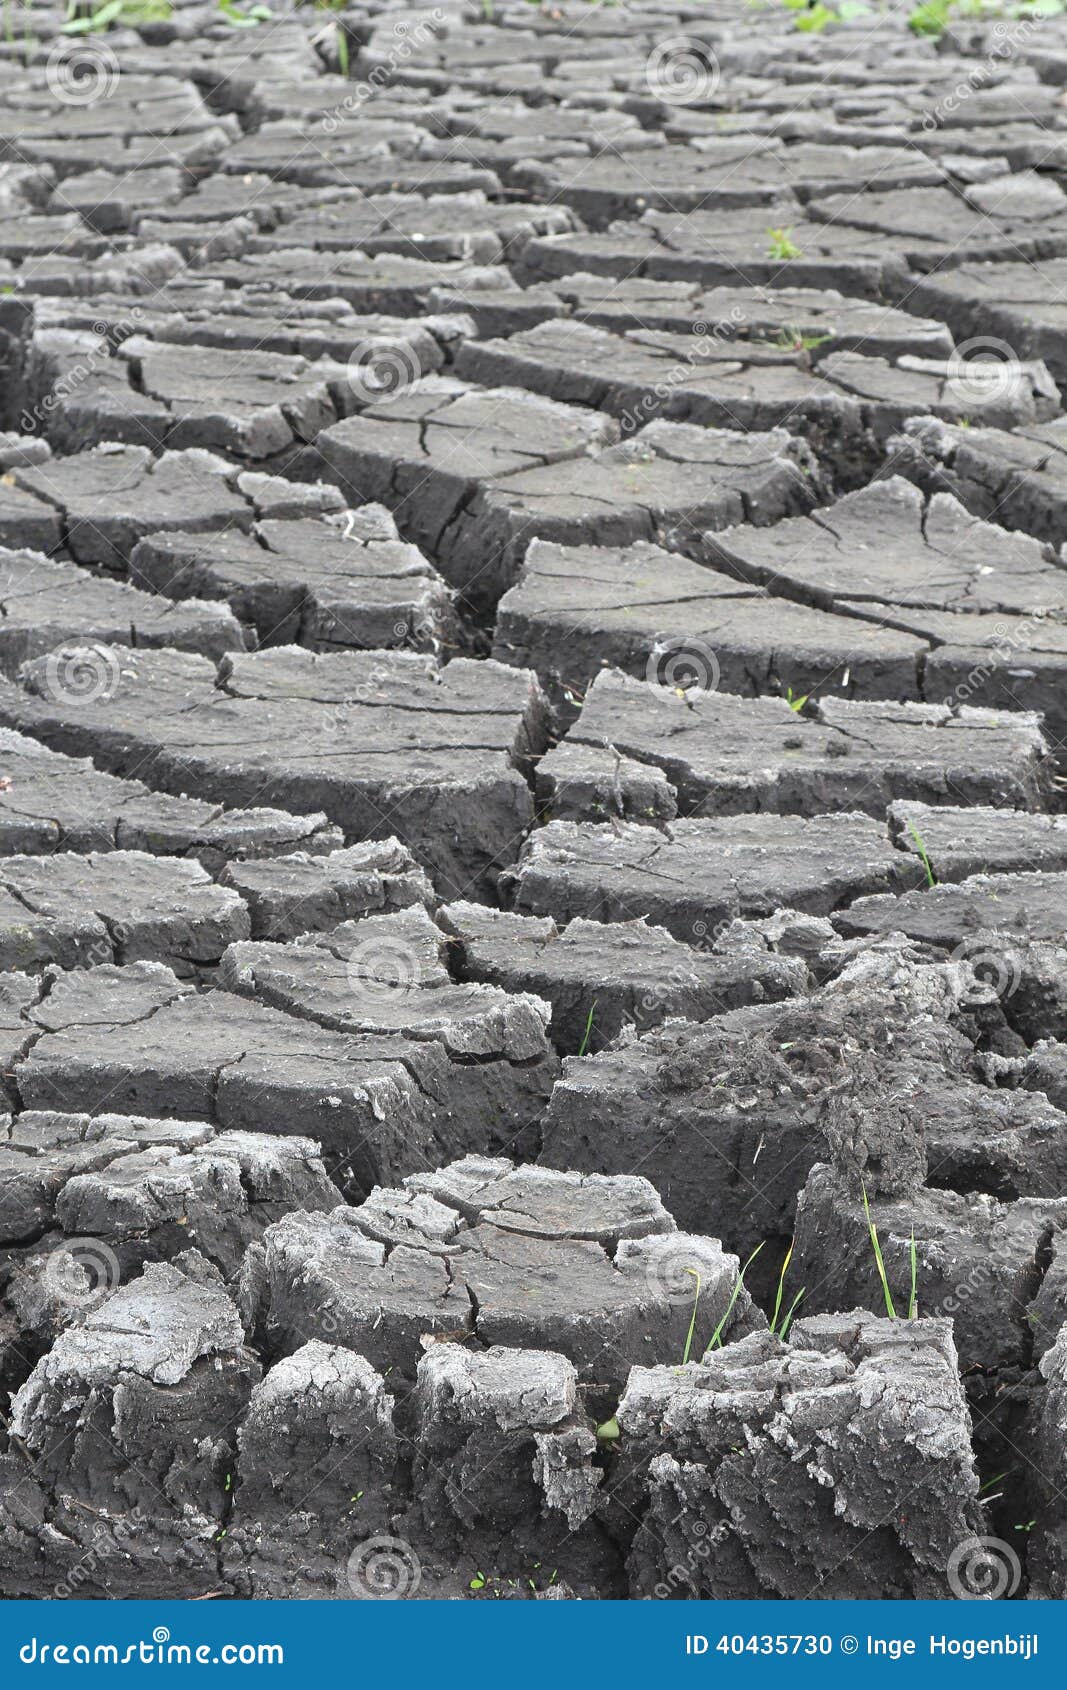 cracked soil by erosion, artwork of nature